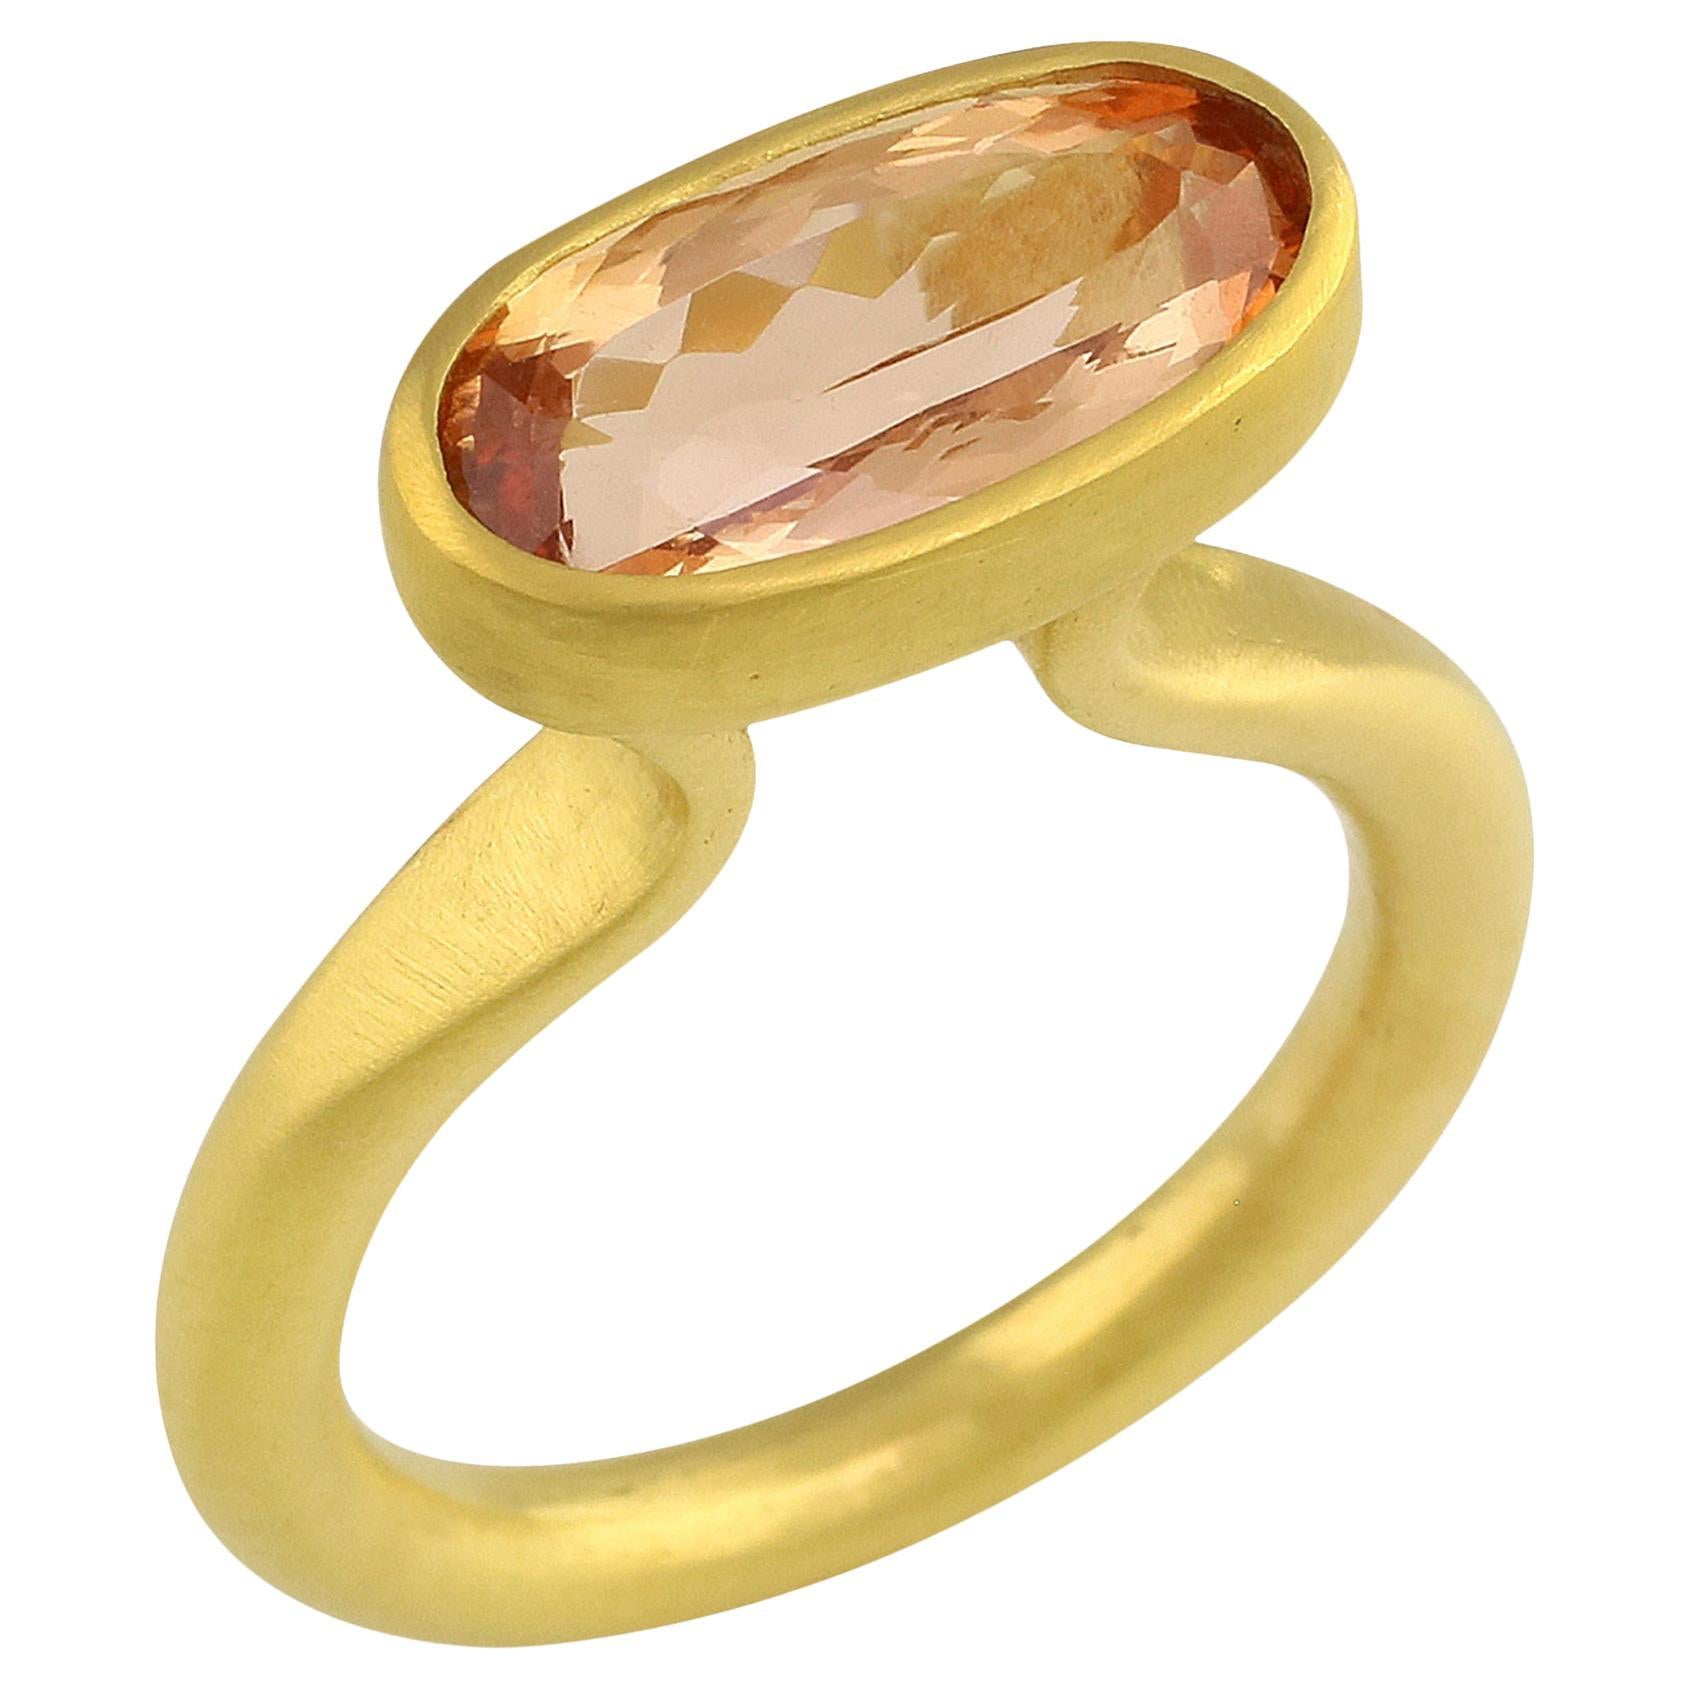 PHILIPPE SPENCER 4.2 Ct. Imperial Topaz in 22K and 20K Gold Statement Ring For Sale